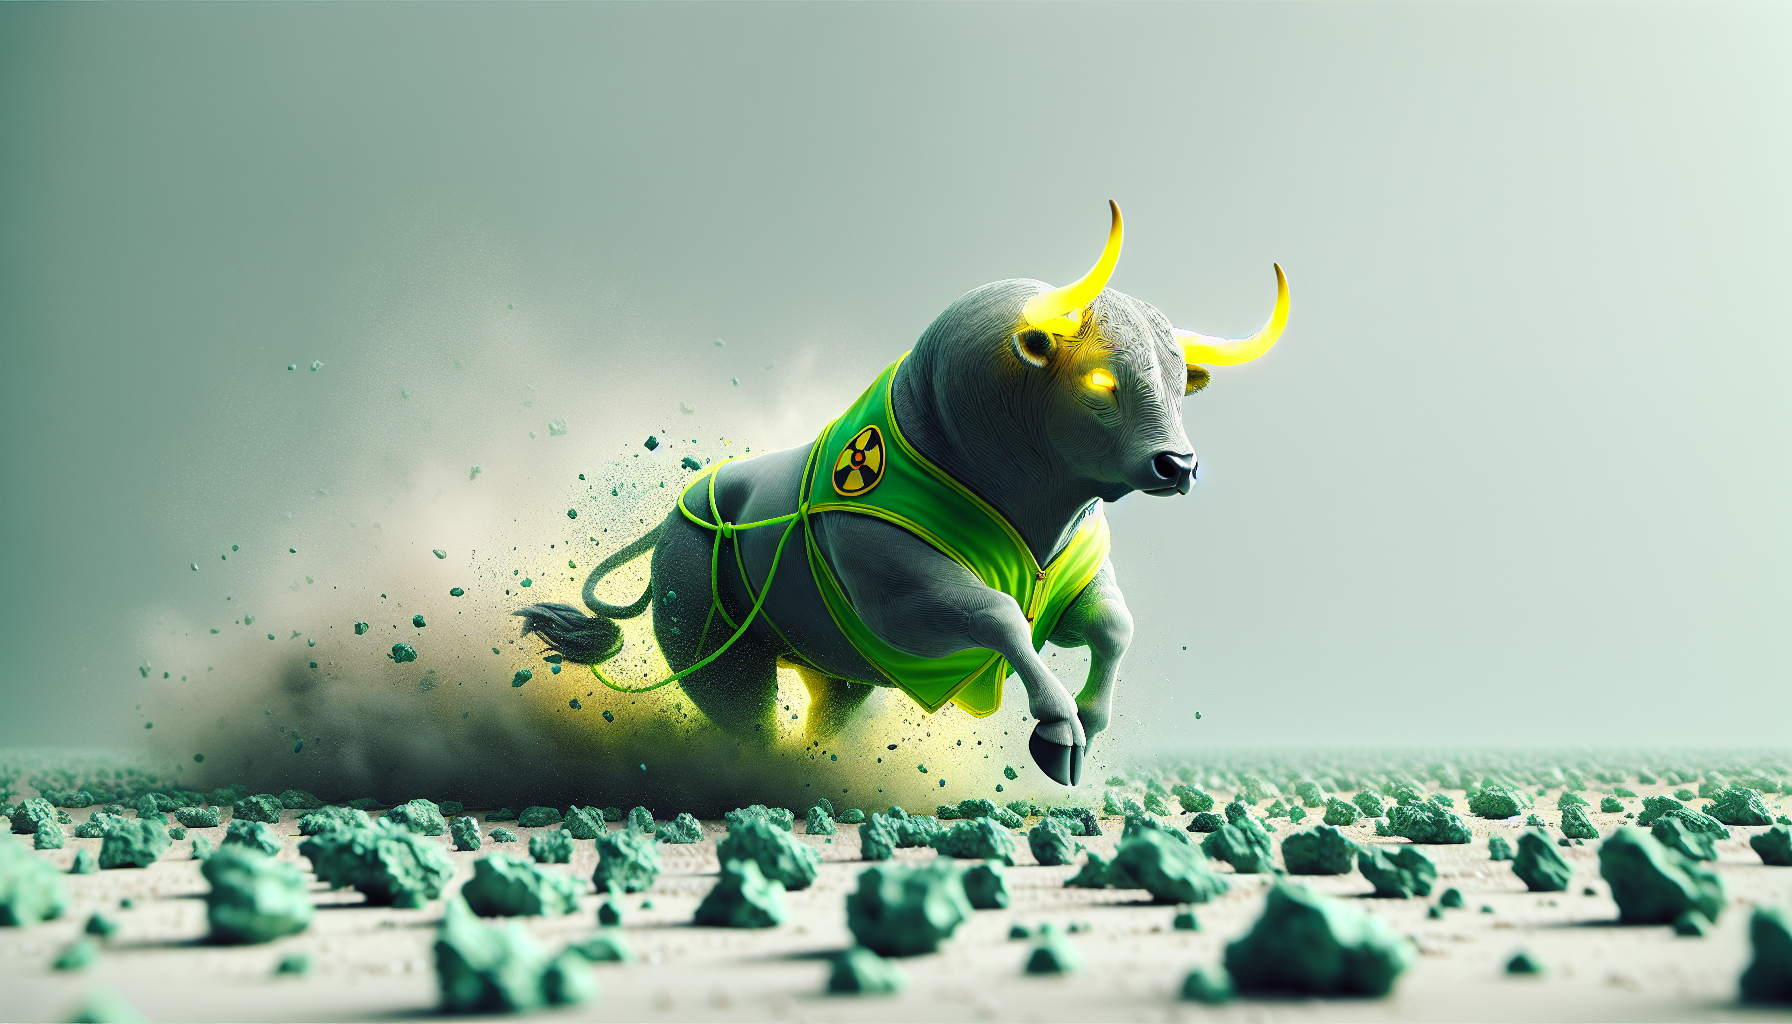 A bull with glowing yellow horns, wearing a green vest, running through a field of uranium ore.